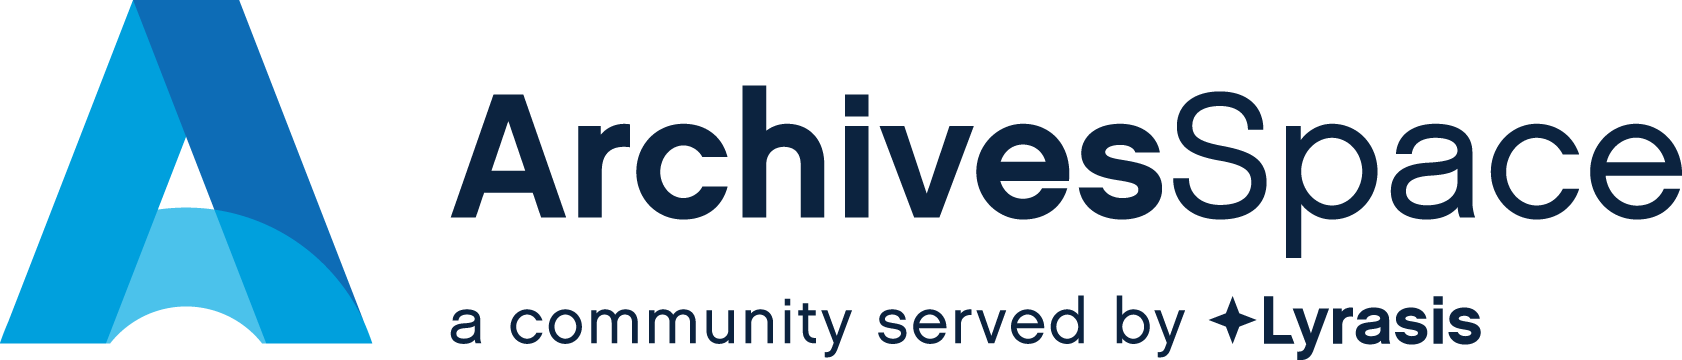 archives space logo